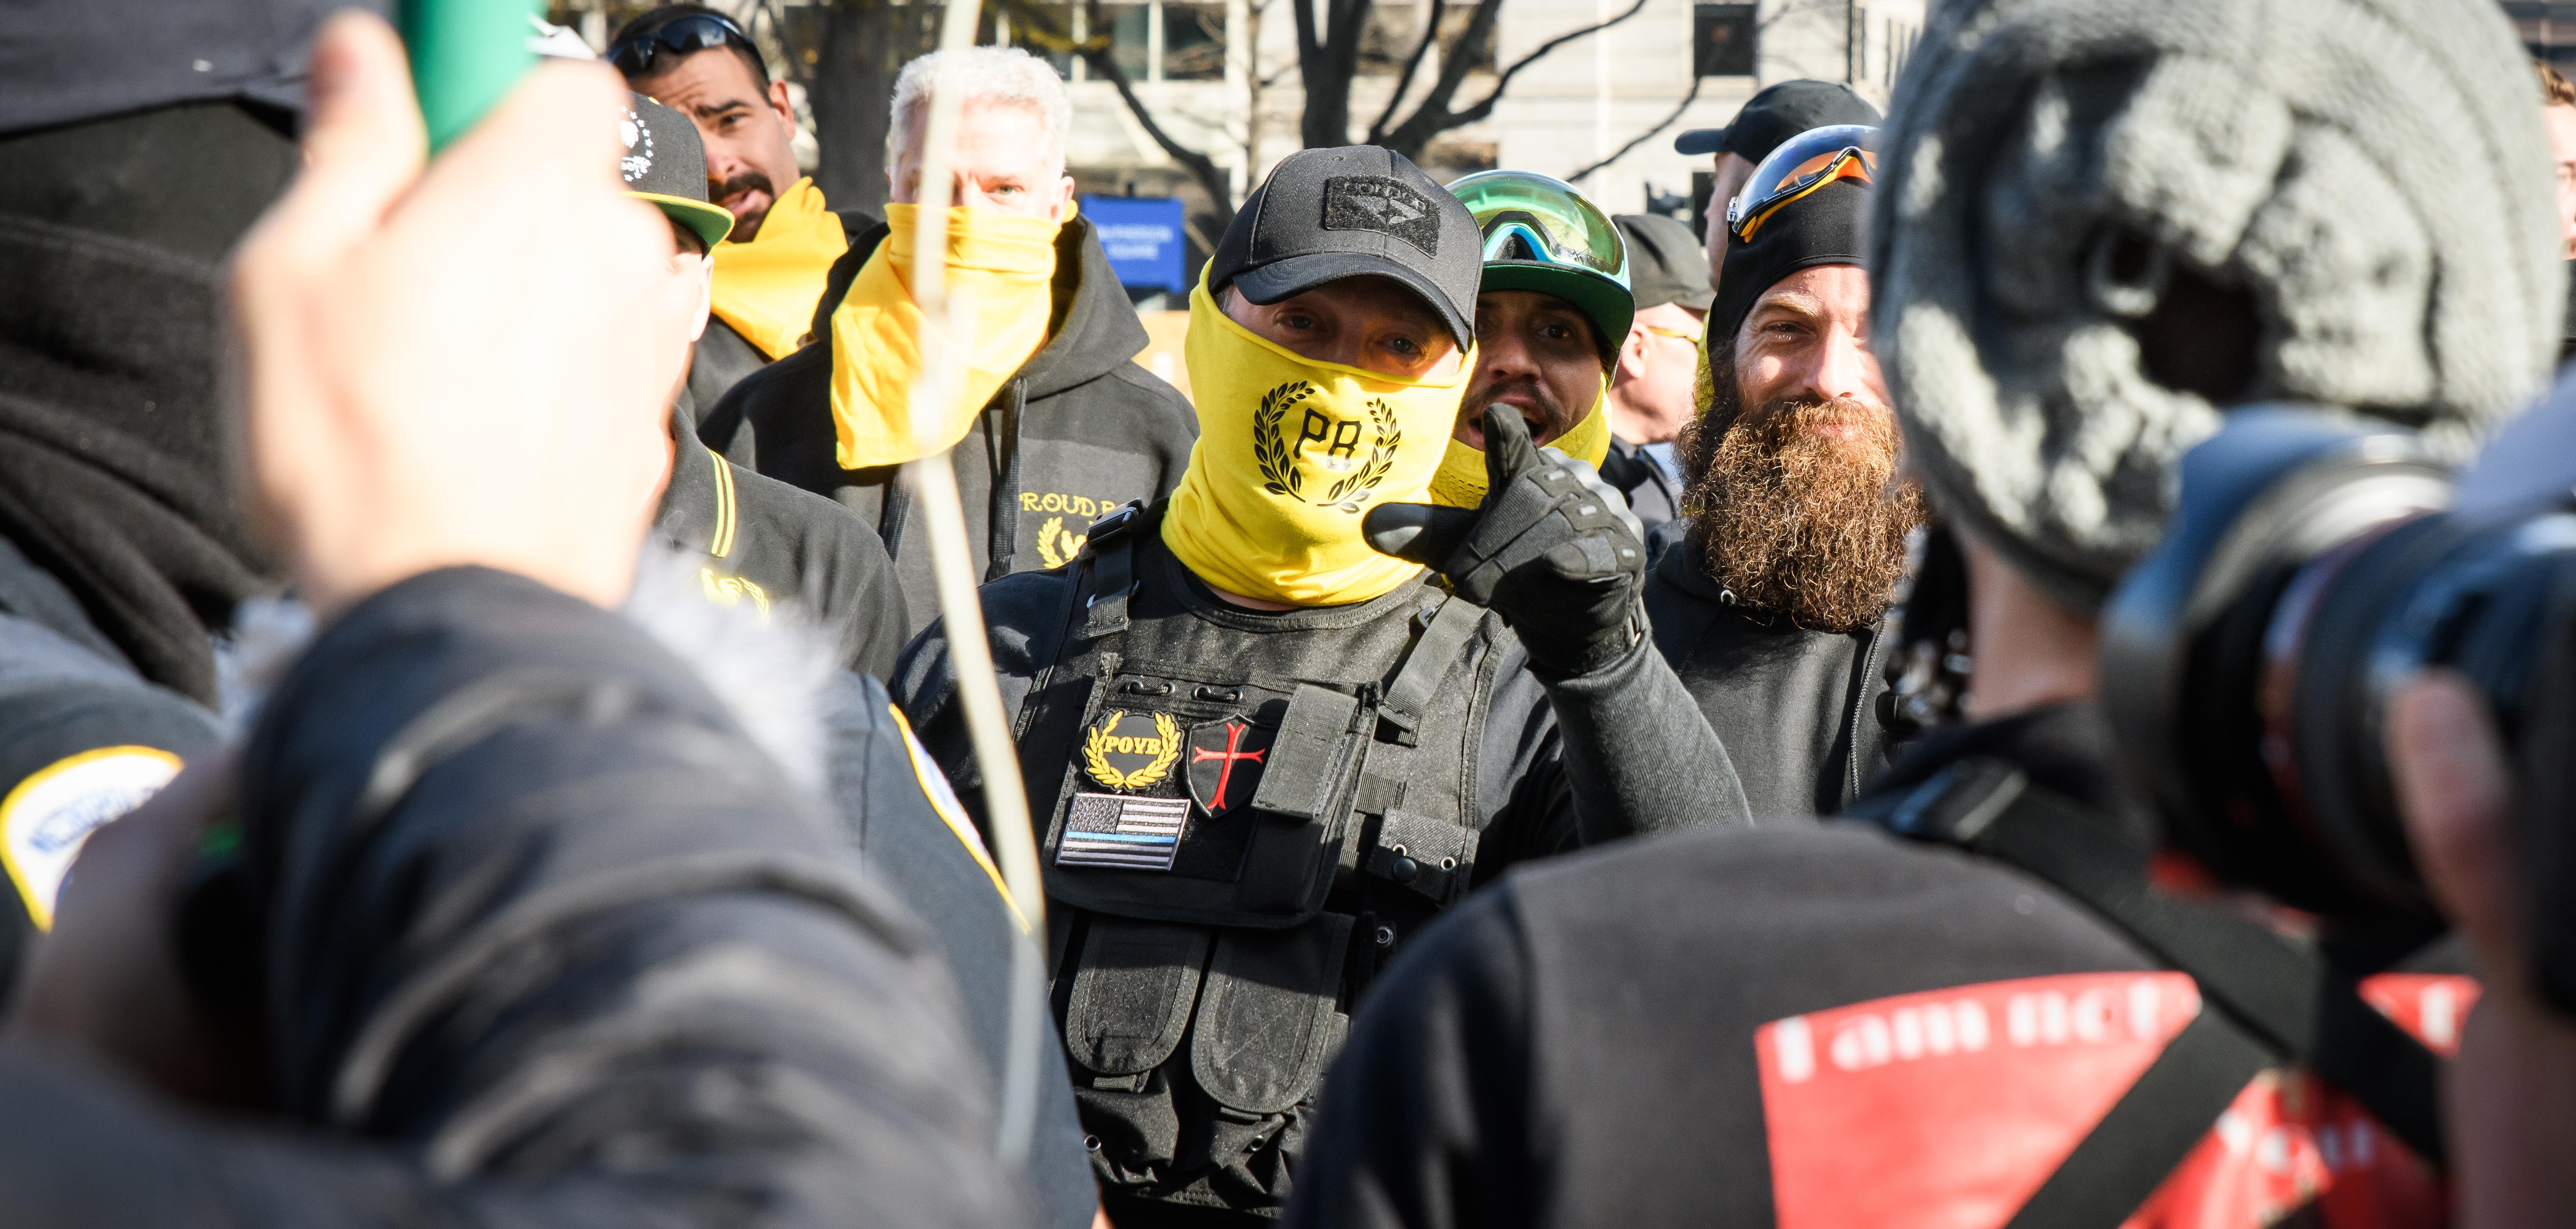 A Proud Boy with a neck warmer covering his mouth points mid-speech at the camera